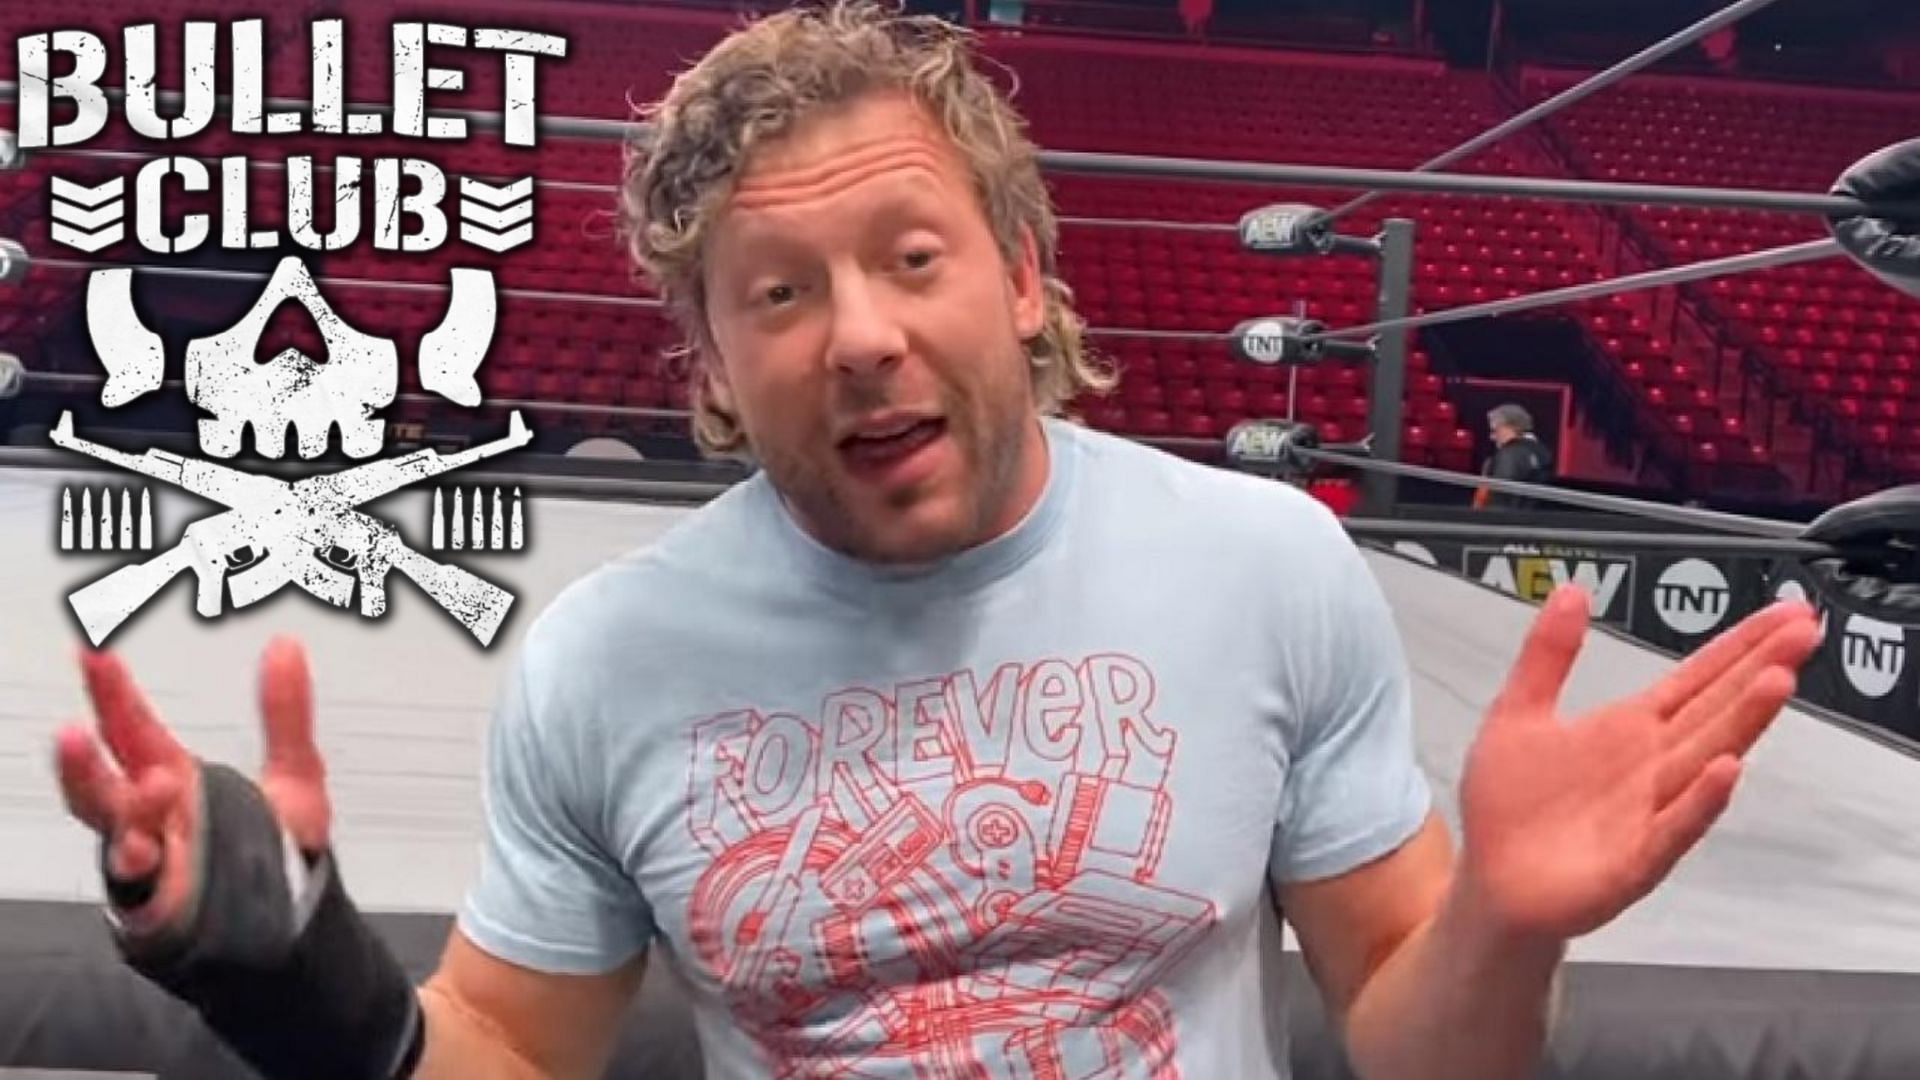 Kenny Omega recently made his return to AEW alongside The Young Bucks.